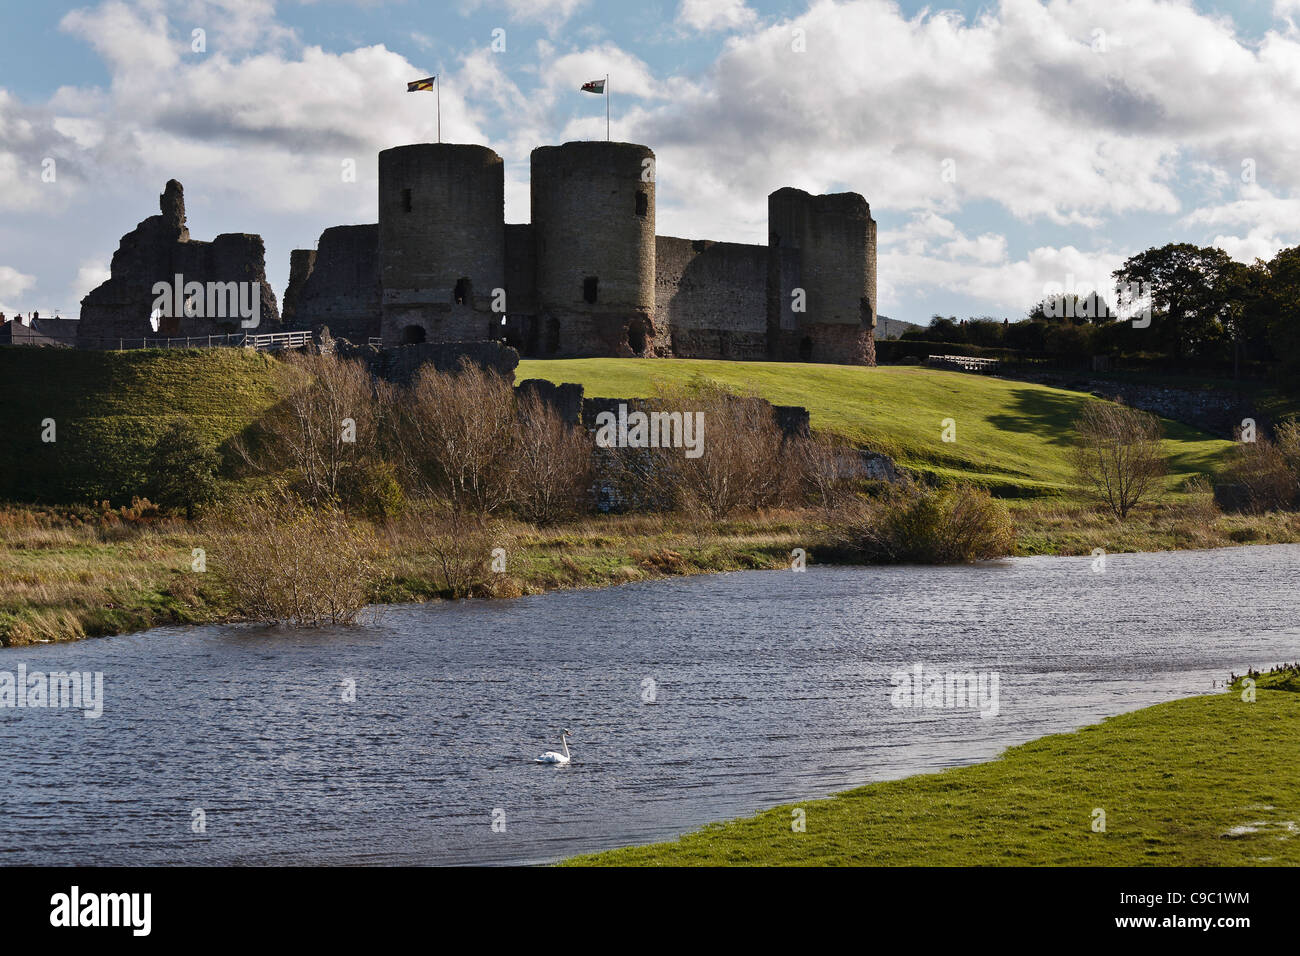 Rhuddlan Castle and River Clwyd, Denbighshire, Wales Stock Photo